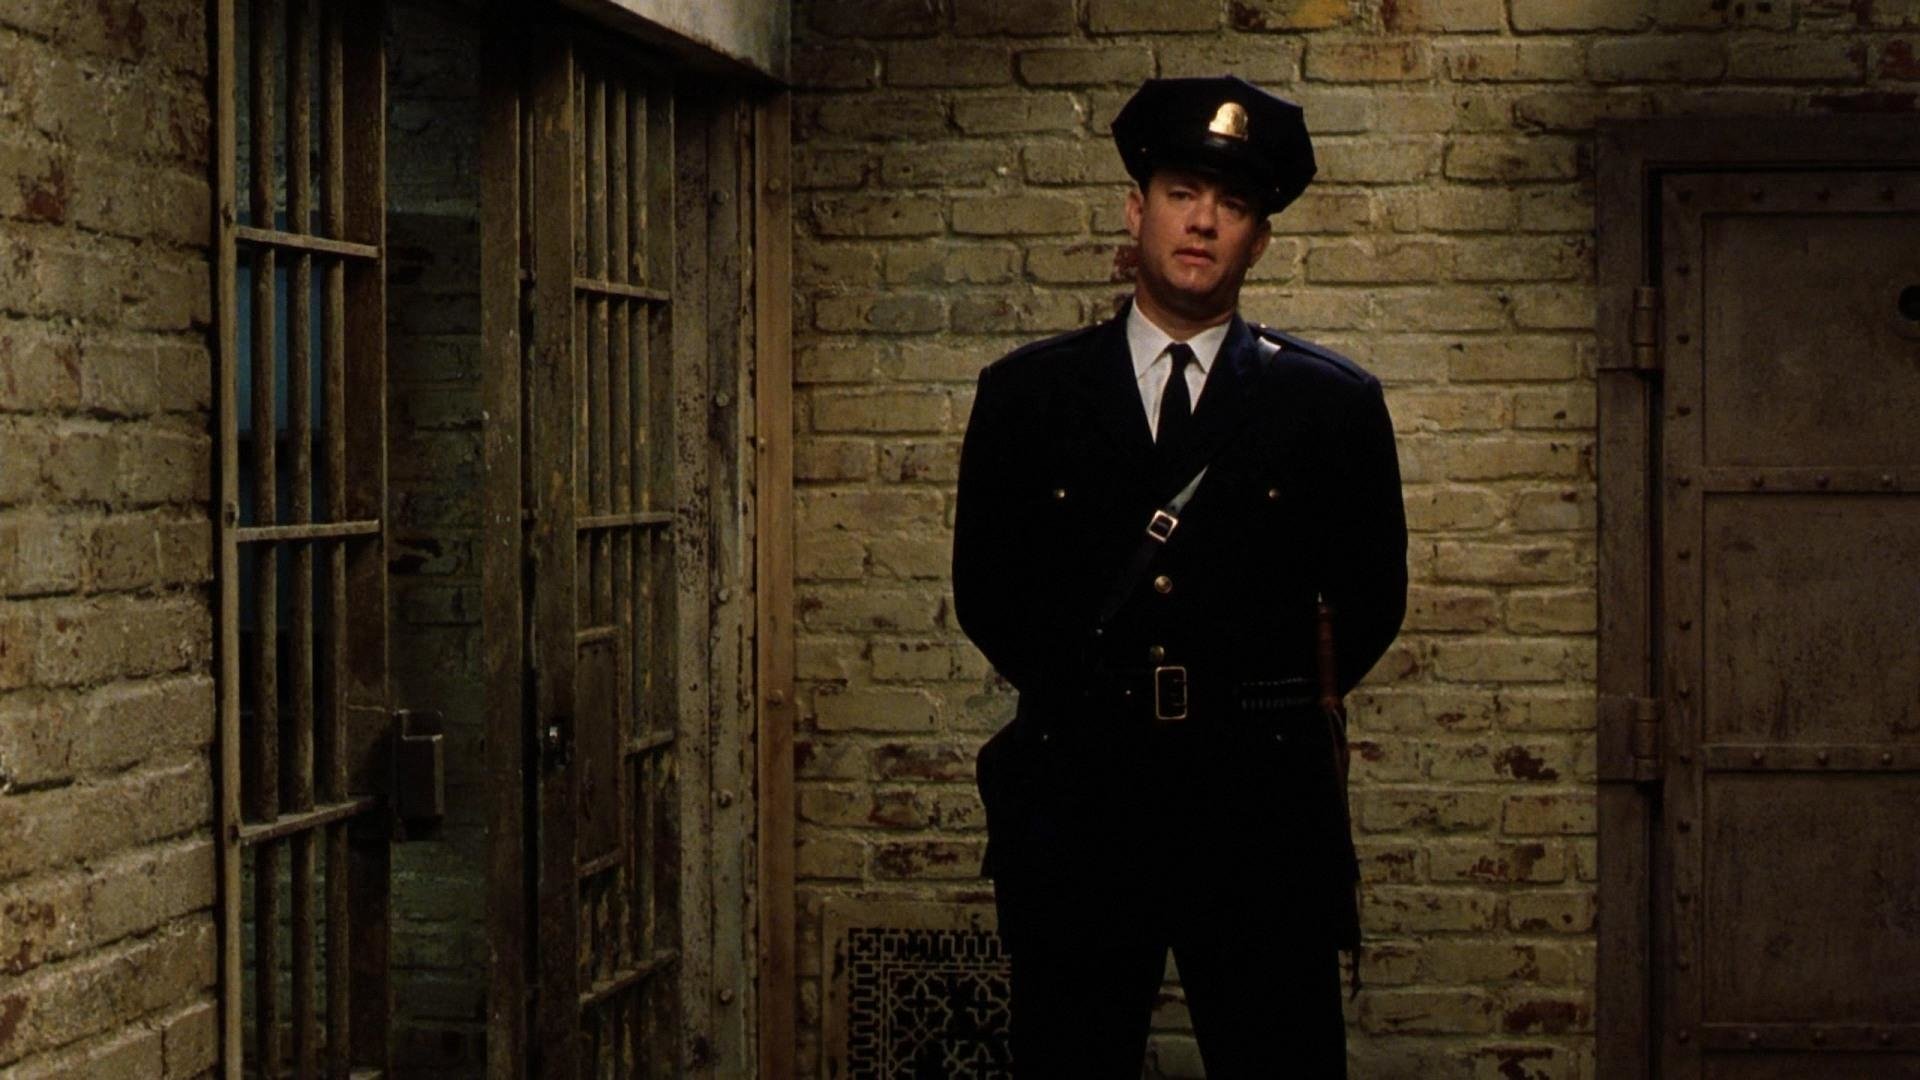 High Resolution Wallpaper | The Green Mile 1920x1080 px